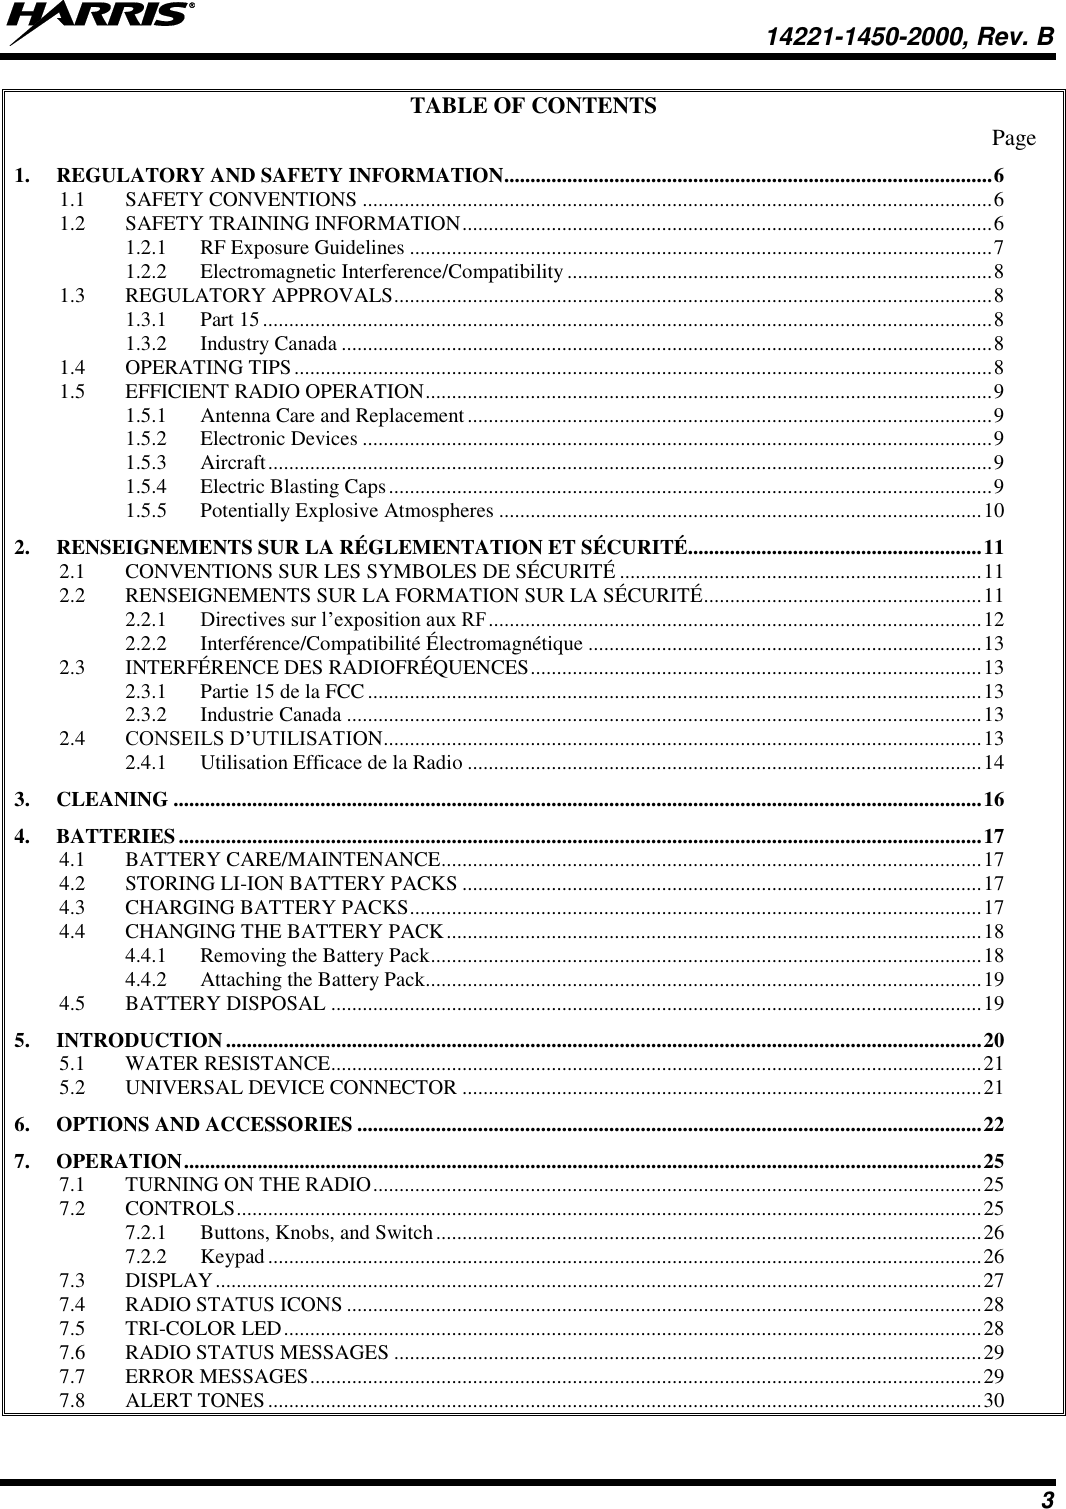   14221-1450-2000, Rev. B 3 TABLE OF CONTENTS Page 1. REGULATORY AND SAFETY INFORMATION ............................................................................................. 6 1.1 SAFETY CONVENTIONS ........................................................................................................................ 6 1.2 SAFETY TRAINING INFORMATION ..................................................................................................... 6 1.2.1 RF Exposure Guidelines ............................................................................................................... 7 1.2.2 Electromagnetic Interference/Compatibility ................................................................................. 8 1.3 REGULATORY APPROVALS .................................................................................................................. 8 1.3.1 Part 15 ........................................................................................................................................... 8 1.3.2 Industry Canada ............................................................................................................................ 8 1.4 OPERATING TIPS ..................................................................................................................................... 8 1.5 EFFICIENT RADIO OPERATION ............................................................................................................ 9 1.5.1 Antenna Care and Replacement .................................................................................................... 9 1.5.2 Electronic Devices ........................................................................................................................ 9 1.5.3 Aircraft .......................................................................................................................................... 9 1.5.4 Electric Blasting Caps ................................................................................................................... 9 1.5.5 Potentially Explosive Atmospheres ............................................................................................ 10 2. RENSEIGNEMENTS SUR LA RÉGLEMENTATION ET SÉCURITÉ........................................................ 11 2.1 CONVENTIONS SUR LES SYMBOLES DE SÉCURITÉ ..................................................................... 11 2.2 RENSEIGNEMENTS SUR LA FORMATION SUR LA SÉCURITÉ ..................................................... 11 2.2.1 Directives sur l’exposition aux RF .............................................................................................. 12 2.2.2 Interférence/Compatibilité Électromagnétique ........................................................................... 13 2.3 INTERFÉRENCE DES RADIOFRÉQUENCES ...................................................................................... 13 2.3.1 Partie 15 de la FCC ..................................................................................................................... 13 2.3.2 Industrie Canada ......................................................................................................................... 13 2.4 CONSEILS D’UTILISATION .................................................................................................................. 13 2.4.1 Utilisation Efficace de la Radio .................................................................................................. 14 3. CLEANING .......................................................................................................................................................... 16 4. BATTERIES ......................................................................................................................................................... 17 4.1 BATTERY CARE/MAINTENANCE ....................................................................................................... 17 4.2 STORING LI-ION BATTERY PACKS ................................................................................................... 17 4.3 CHARGING BATTERY PACKS ............................................................................................................. 17 4.4 CHANGING THE BATTERY PACK ...................................................................................................... 18 4.4.1 Removing the Battery Pack ......................................................................................................... 18 4.4.2 Attaching the Battery Pack.......................................................................................................... 19 4.5 BATTERY DISPOSAL ............................................................................................................................ 19 5. INTRODUCTION ................................................................................................................................................ 20 5.1 WATER RESISTANCE............................................................................................................................ 21 5.2 UNIVERSAL DEVICE CONNECTOR ................................................................................................... 21 6. OPTIONS AND ACCESSORIES ....................................................................................................................... 22 7. OPERATION ........................................................................................................................................................ 25 7.1 TURNING ON THE RADIO .................................................................................................................... 25 7.2 CONTROLS .............................................................................................................................................. 25 7.2.1 Buttons, Knobs, and Switch ........................................................................................................ 26 7.2.2 Keypad ........................................................................................................................................ 26 7.3 DISPLAY .................................................................................................................................................. 27 7.4 RADIO STATUS ICONS ......................................................................................................................... 28 7.5 TRI-COLOR LED ..................................................................................................................................... 28 7.6 RADIO STATUS MESSAGES ................................................................................................................ 29 7.7 ERROR MESSAGES ................................................................................................................................ 29 7.8 ALERT TONES ........................................................................................................................................ 30 